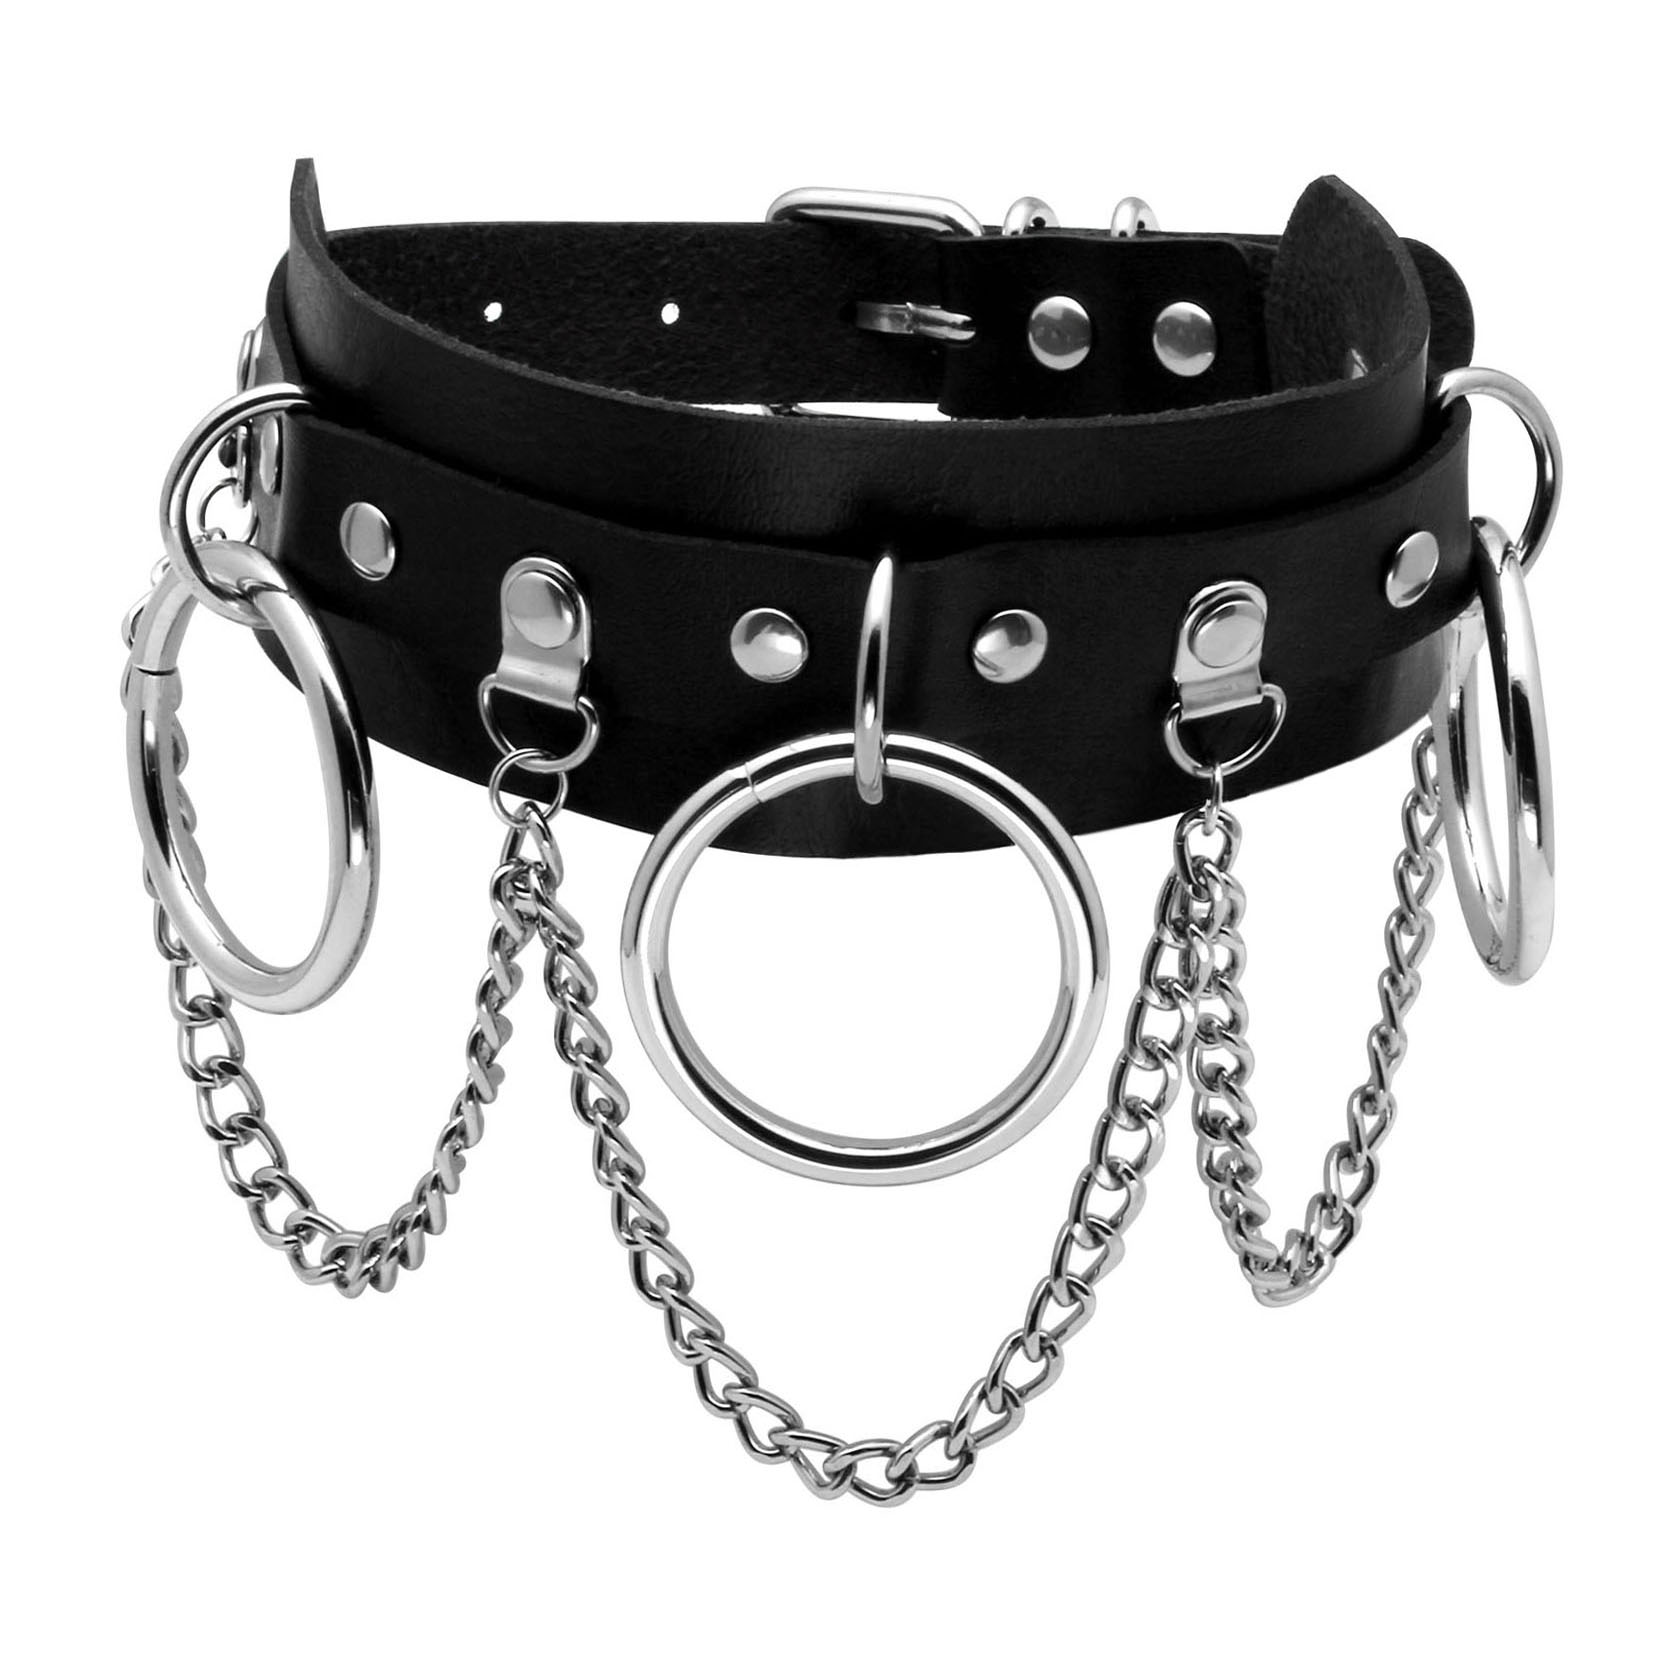 Women girls faux leather choker necklaces punk rock alloy rivet collar with chains